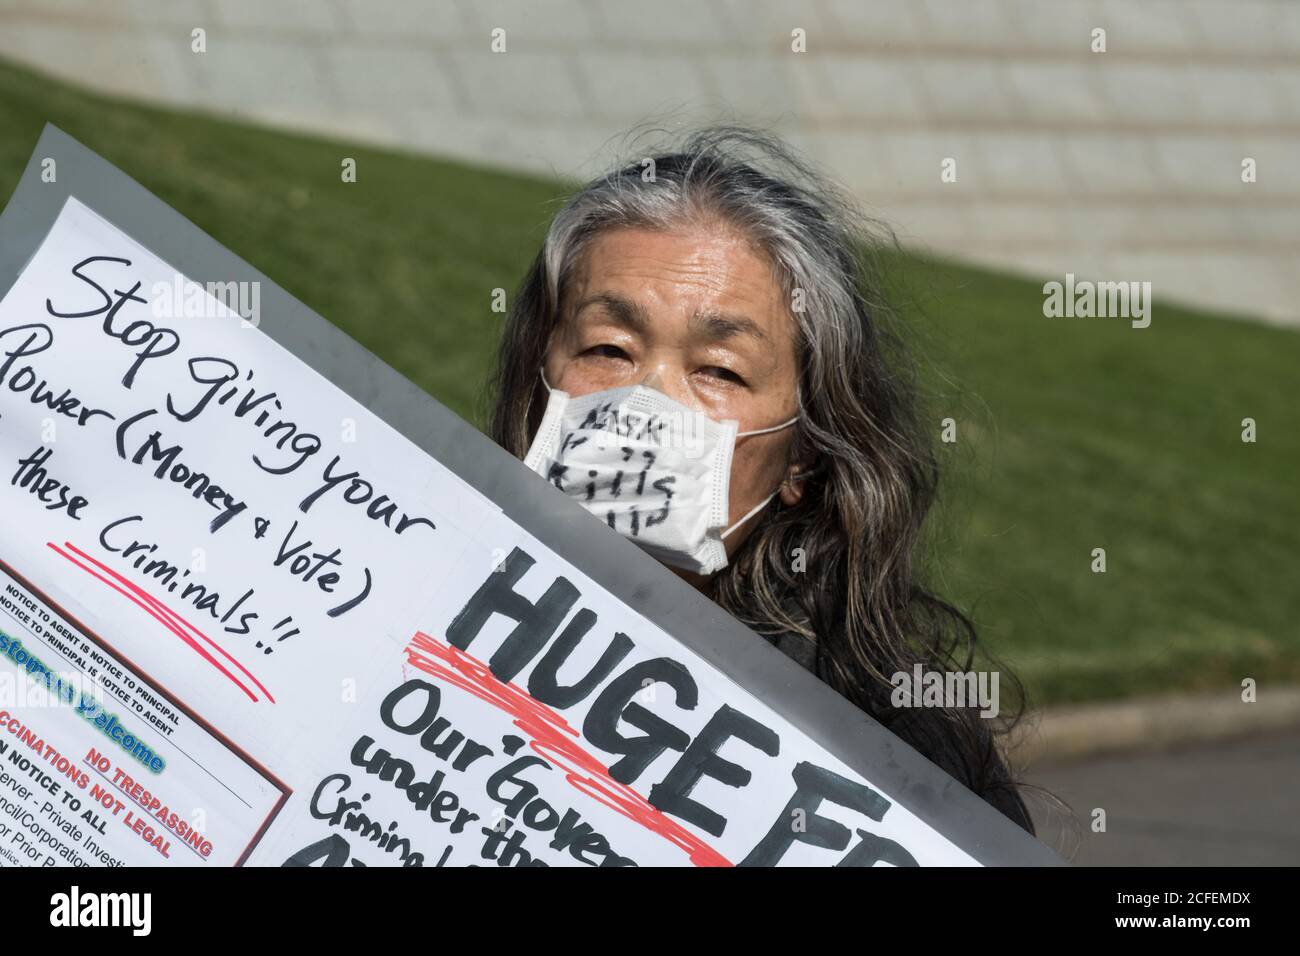 Melbourne, Australia 5 Sep 2020, a female protestor holds her placard at the Freedom Day Anti-mask and anti lockdown protest on the steps of the Shrine of Remembrance in Melbourne Australia. Credit: Michael Currie/Alamy Live News Stock Photo